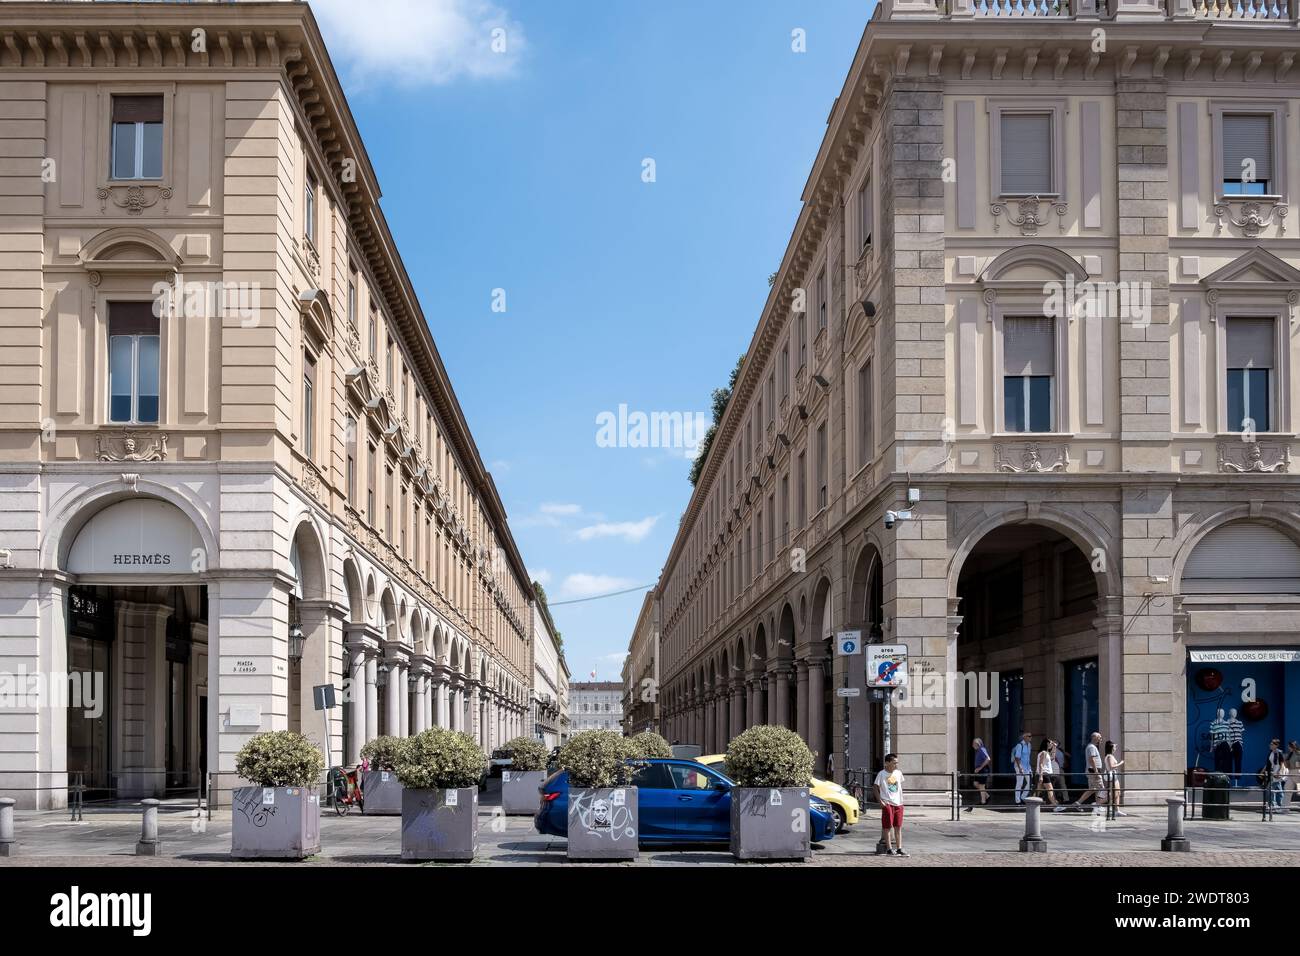 View of Via Roma, an iconic shopping street with luxury stores, from Piazza San Carlo, a square renowned for its Baroque architecture, Turin Stock Photo